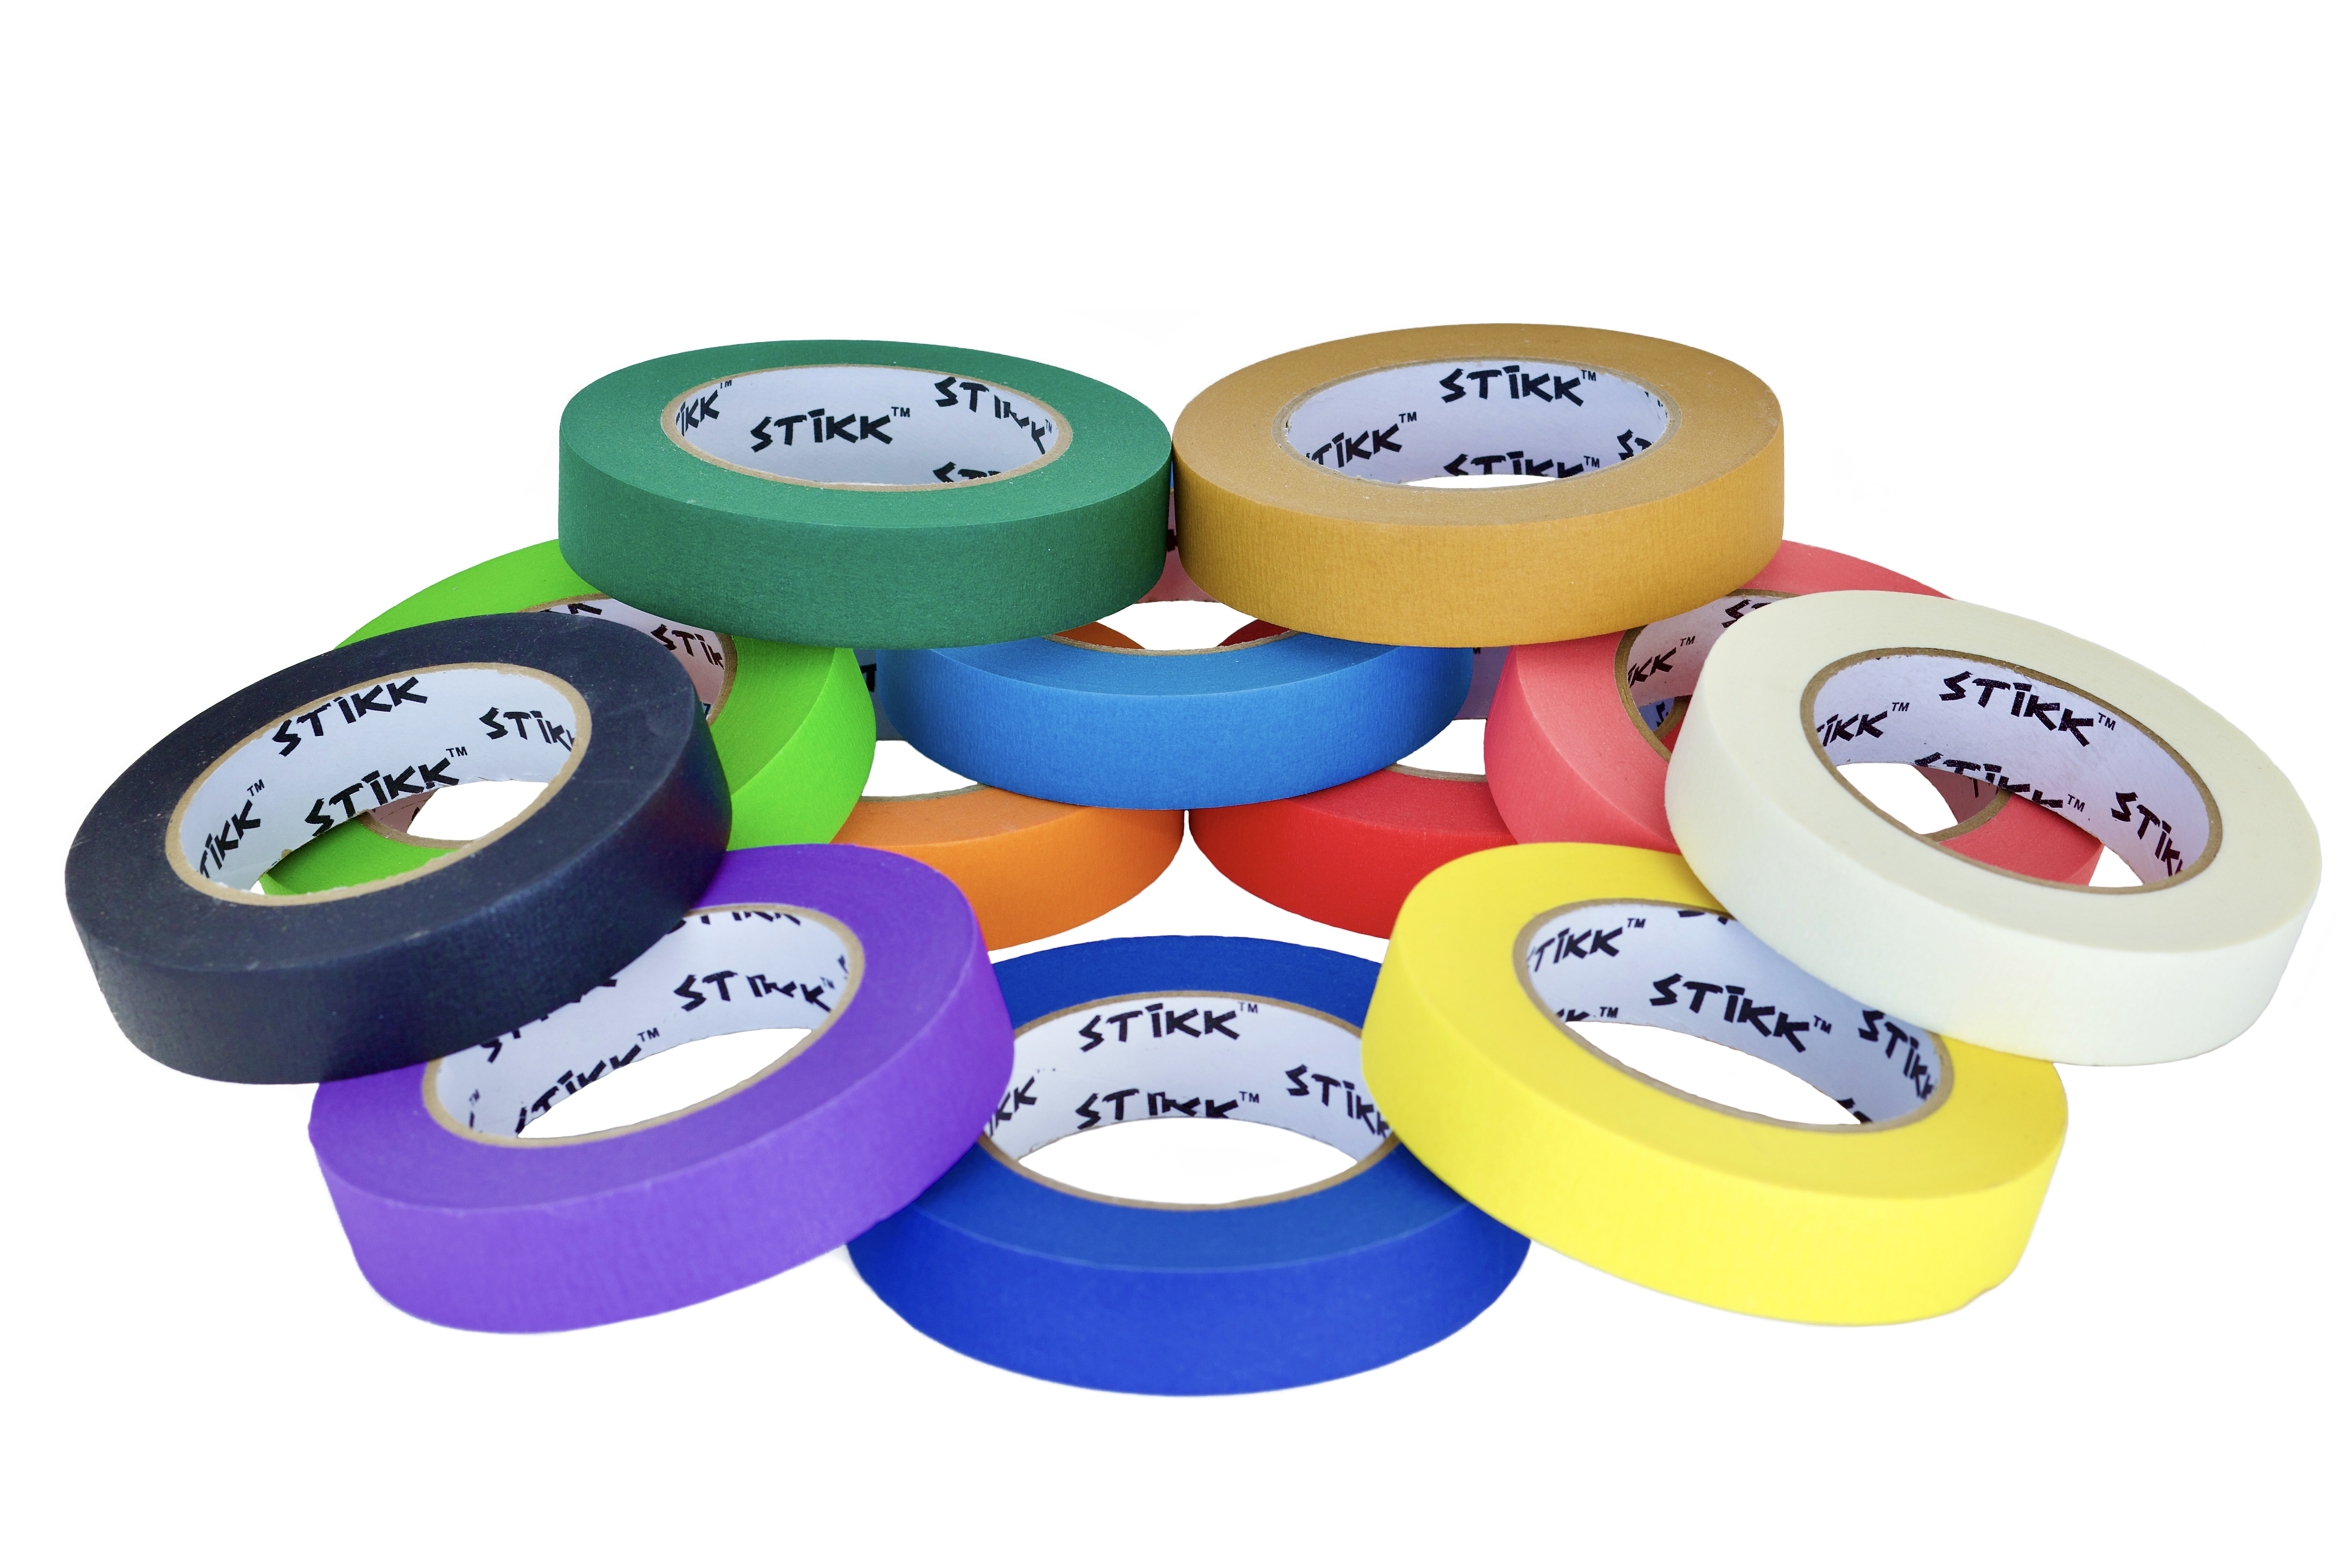 3 Pk 1 inch x 60yd Stikk Red Painters Tape 14 Day Easy Removal Trim Edge Finishing Decorative Marking Masking Tape (.94 in 24mm)